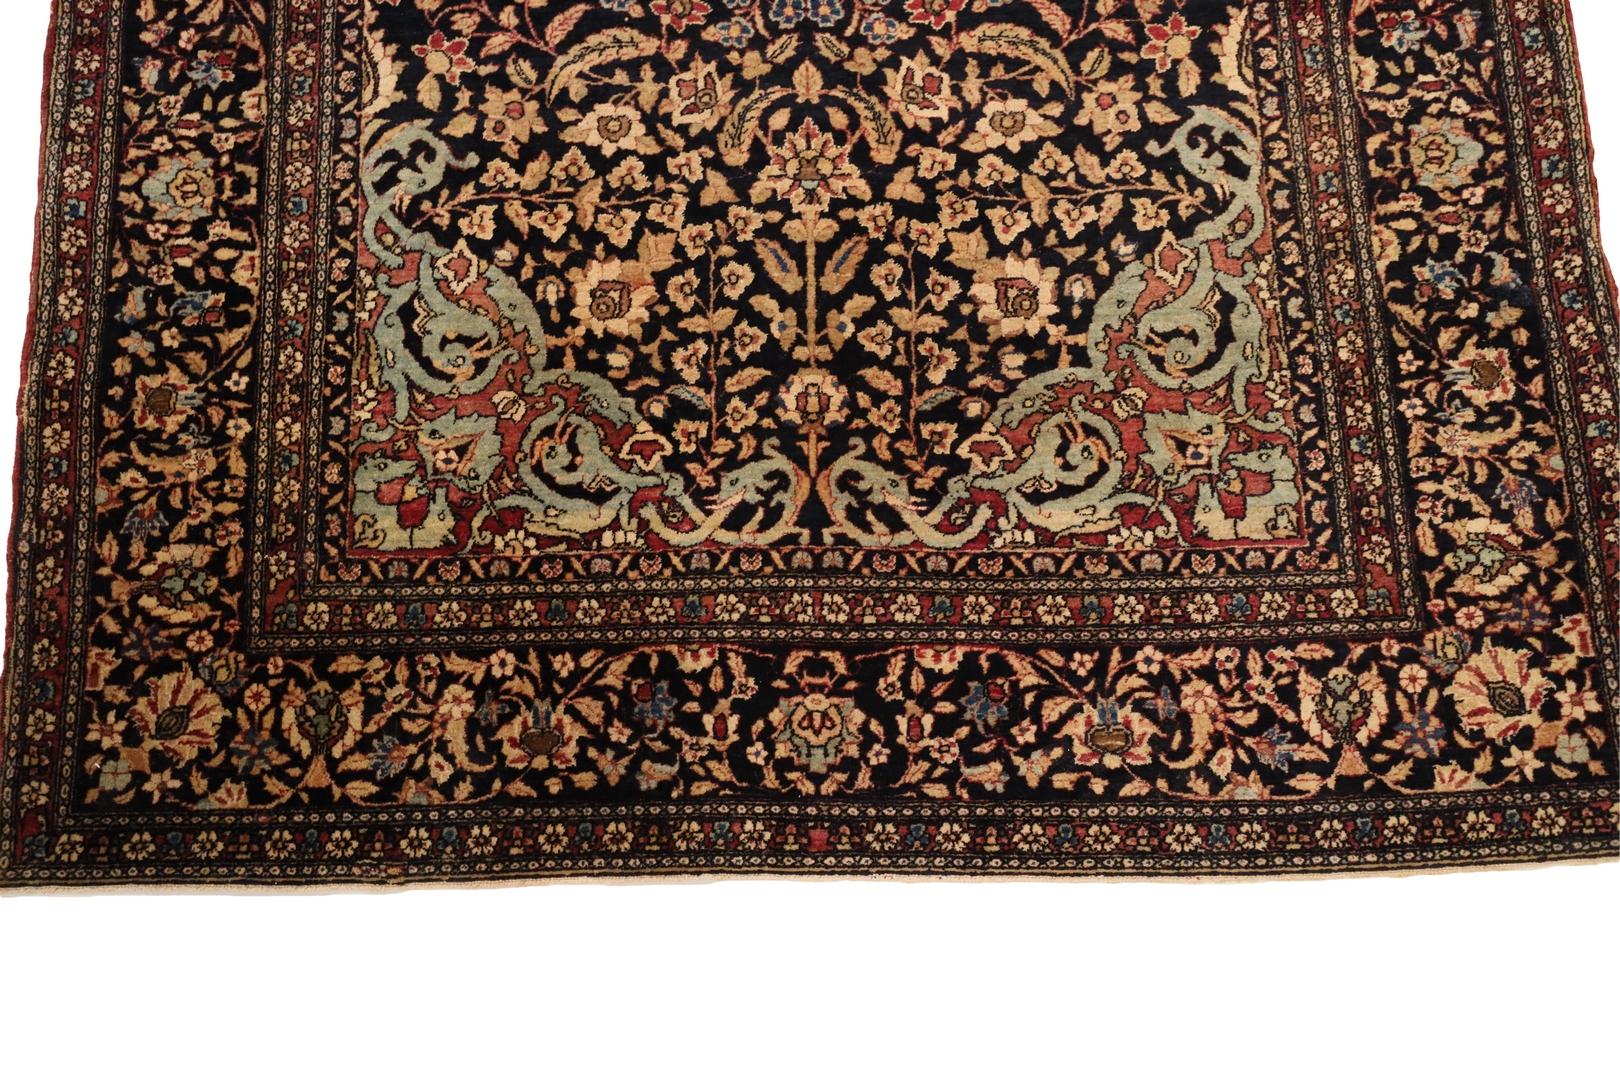 An Isfahan rug is a true masterpiece of Persian weaving, and your rug is no exception. Its breathtaking design is anchored by a radiant sun motif in the center, which is skillfully rendered in vivid shades of red and blue. The sun's warmth and